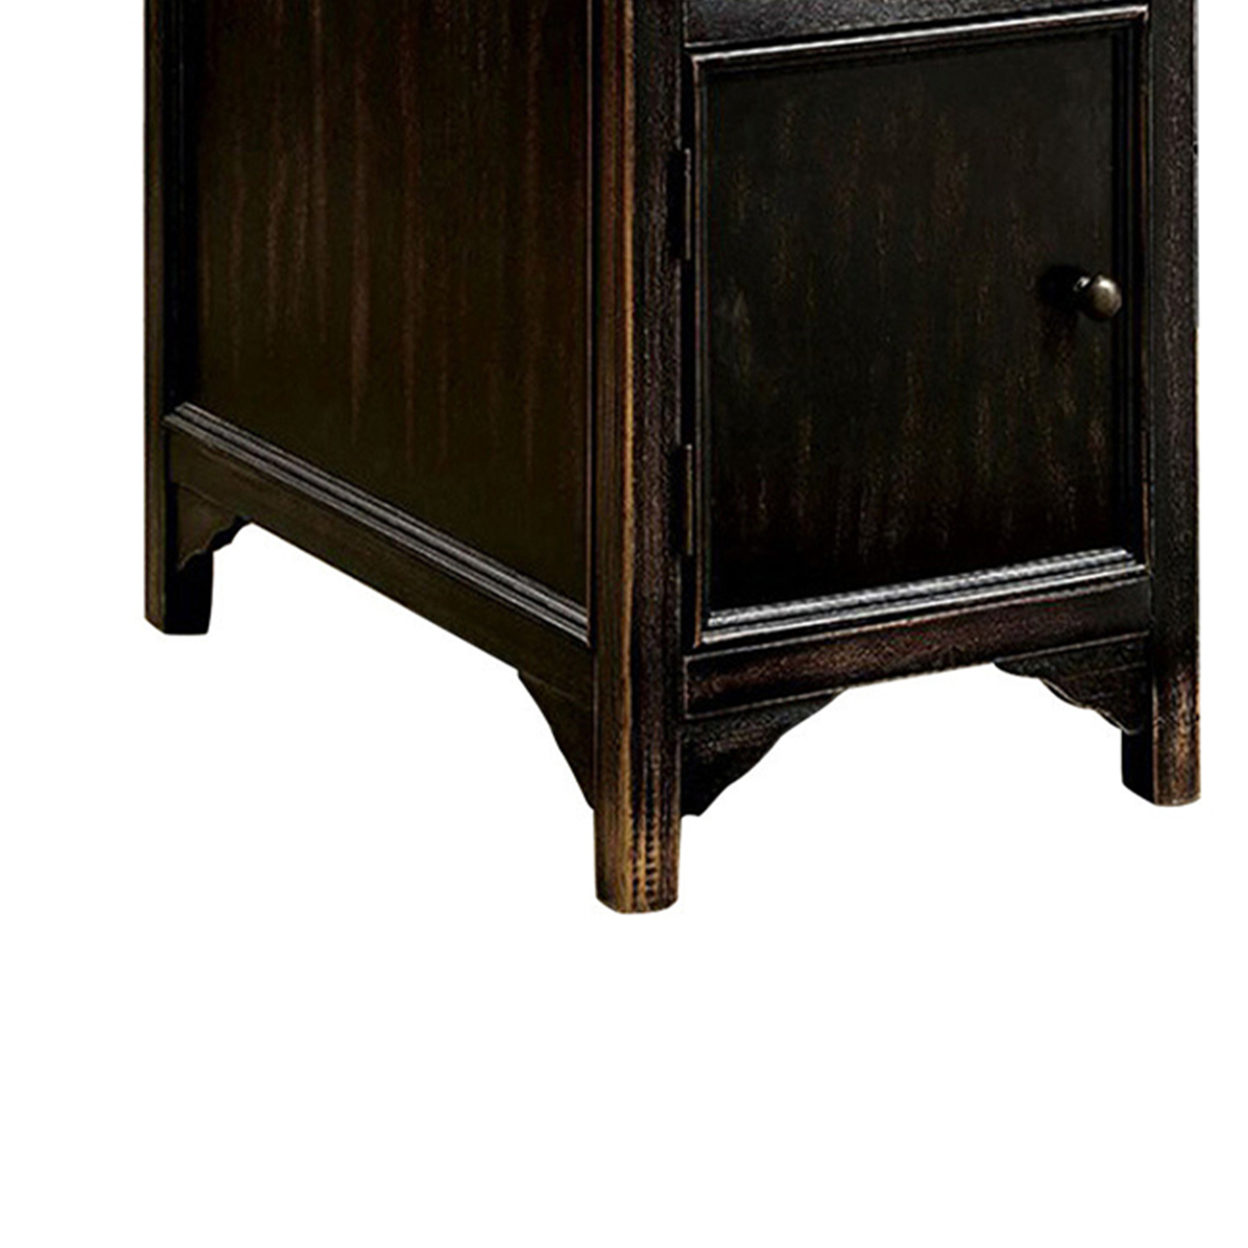 Transitional Wooden Side Table With 1 Drawer And 1 Cabinet, Antique Black- Saltoro Sherpi